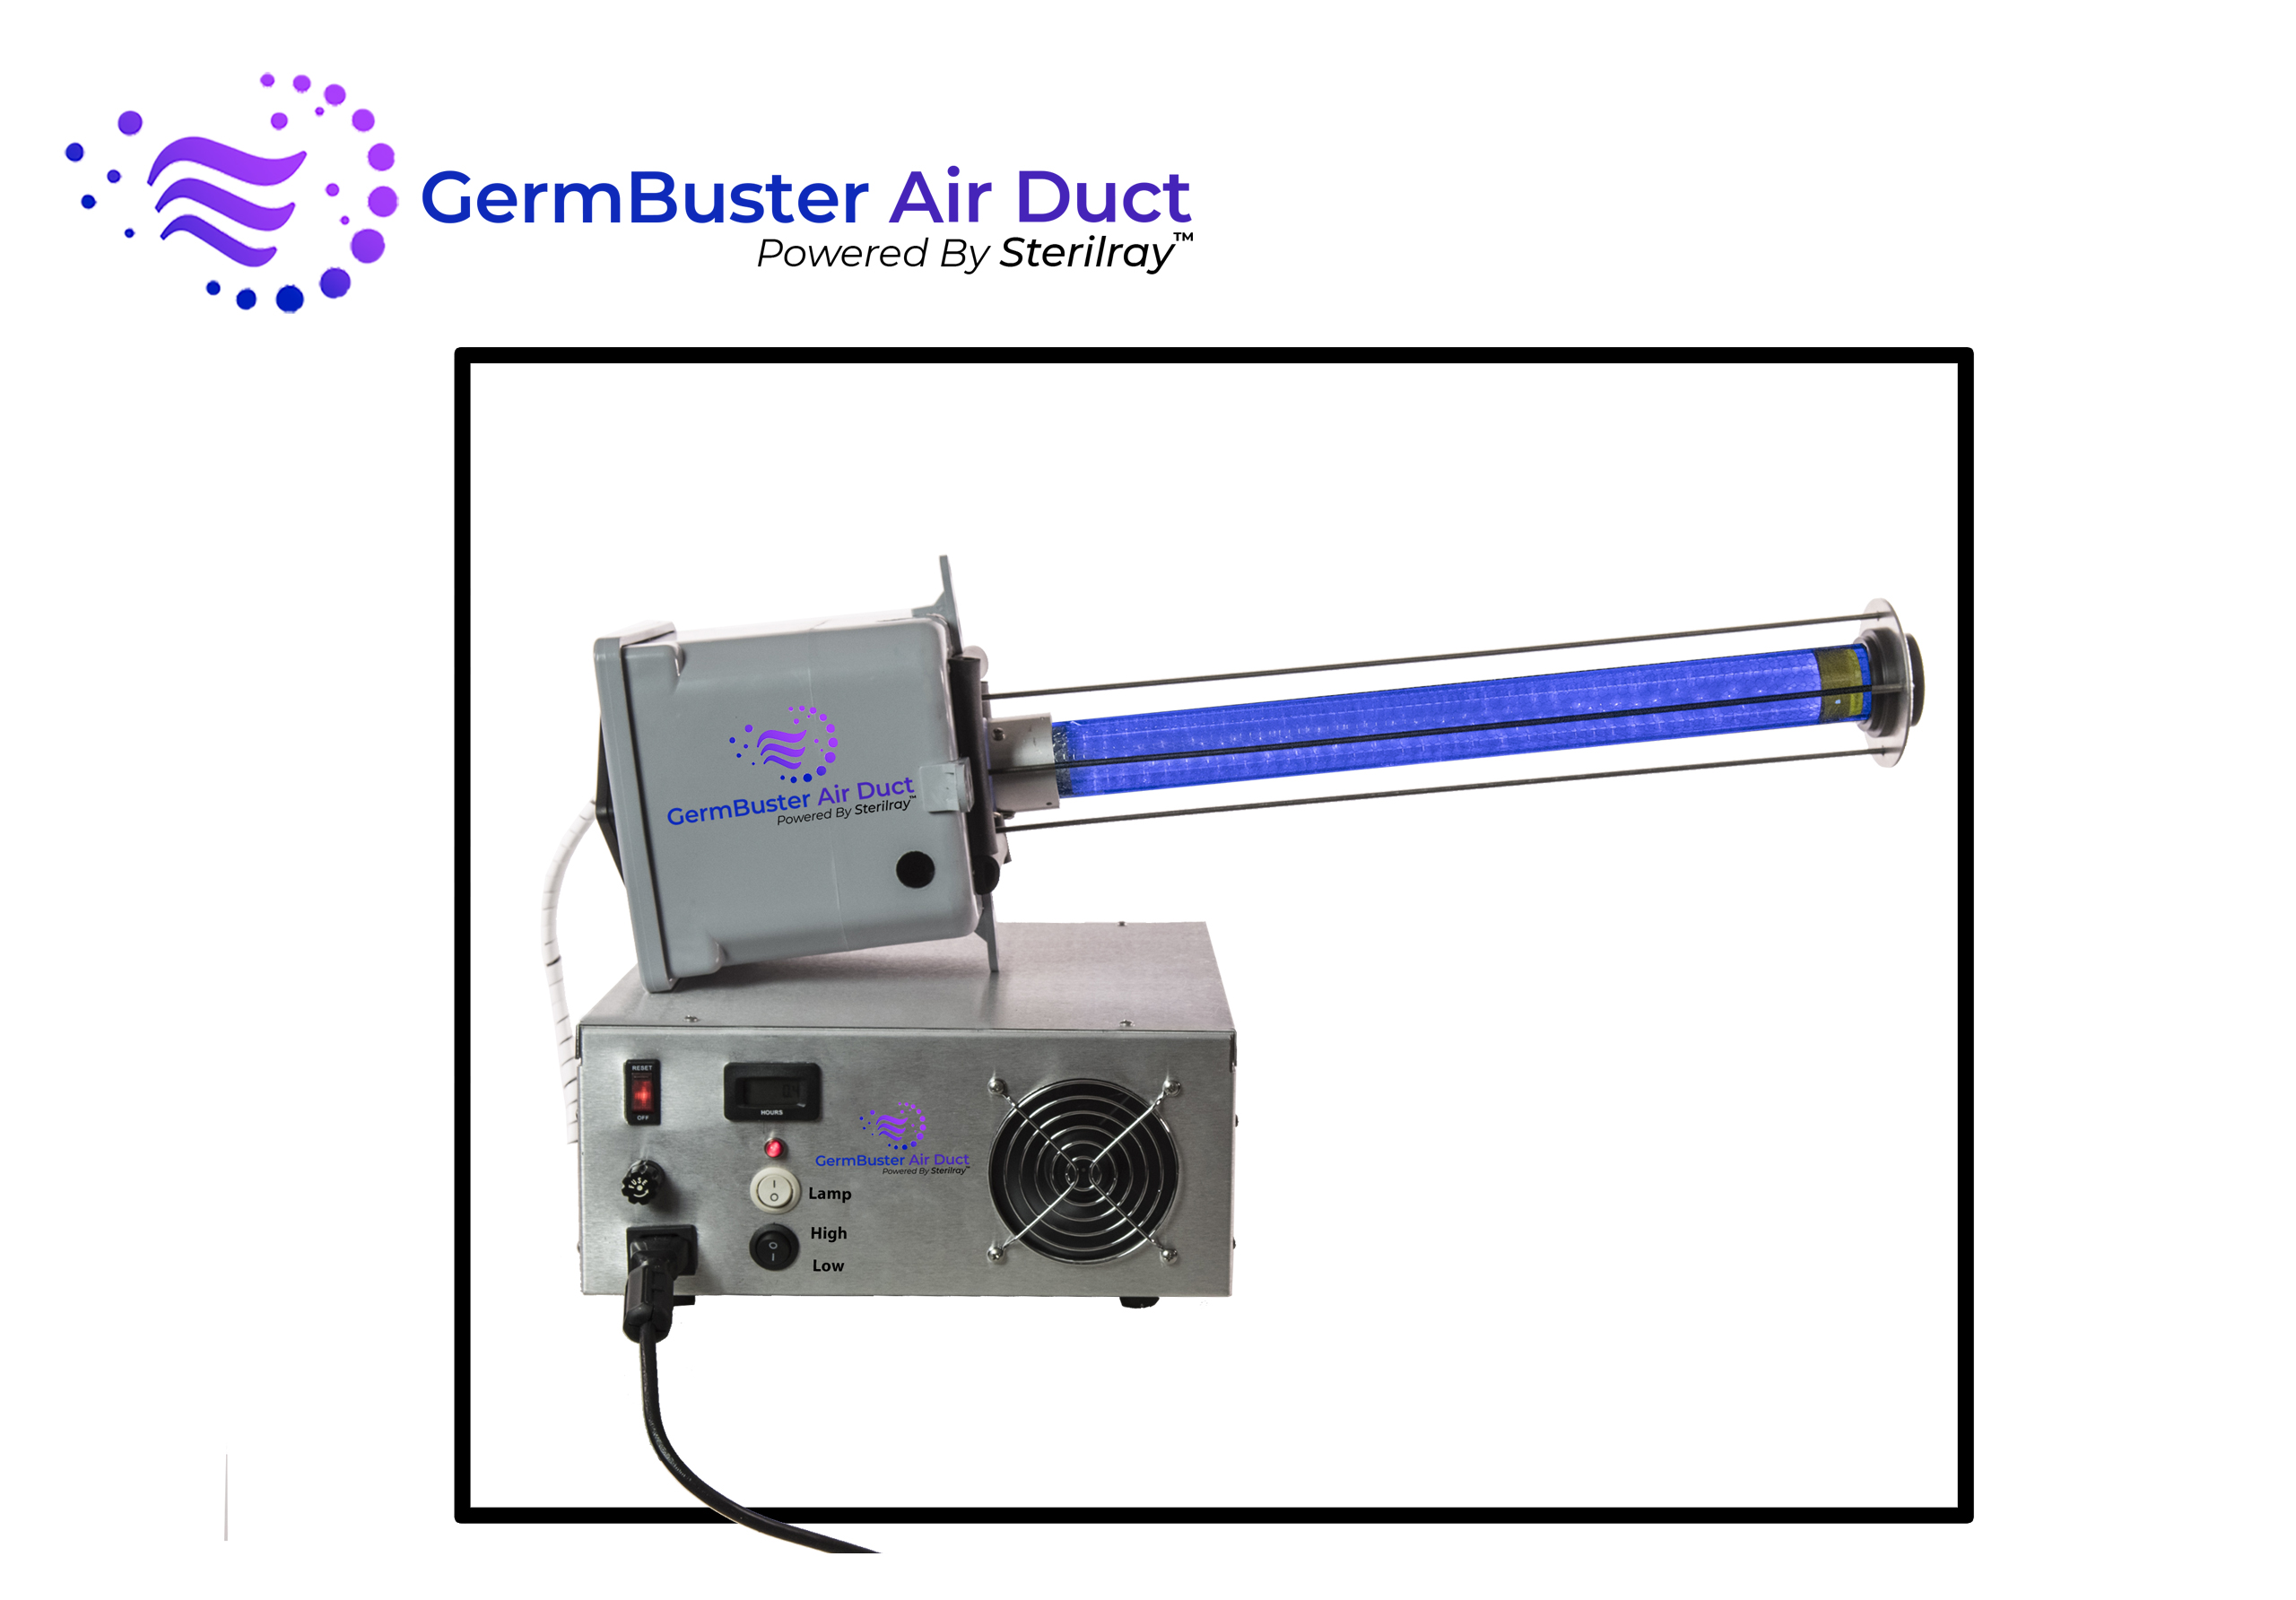 GermBuster Air Duct